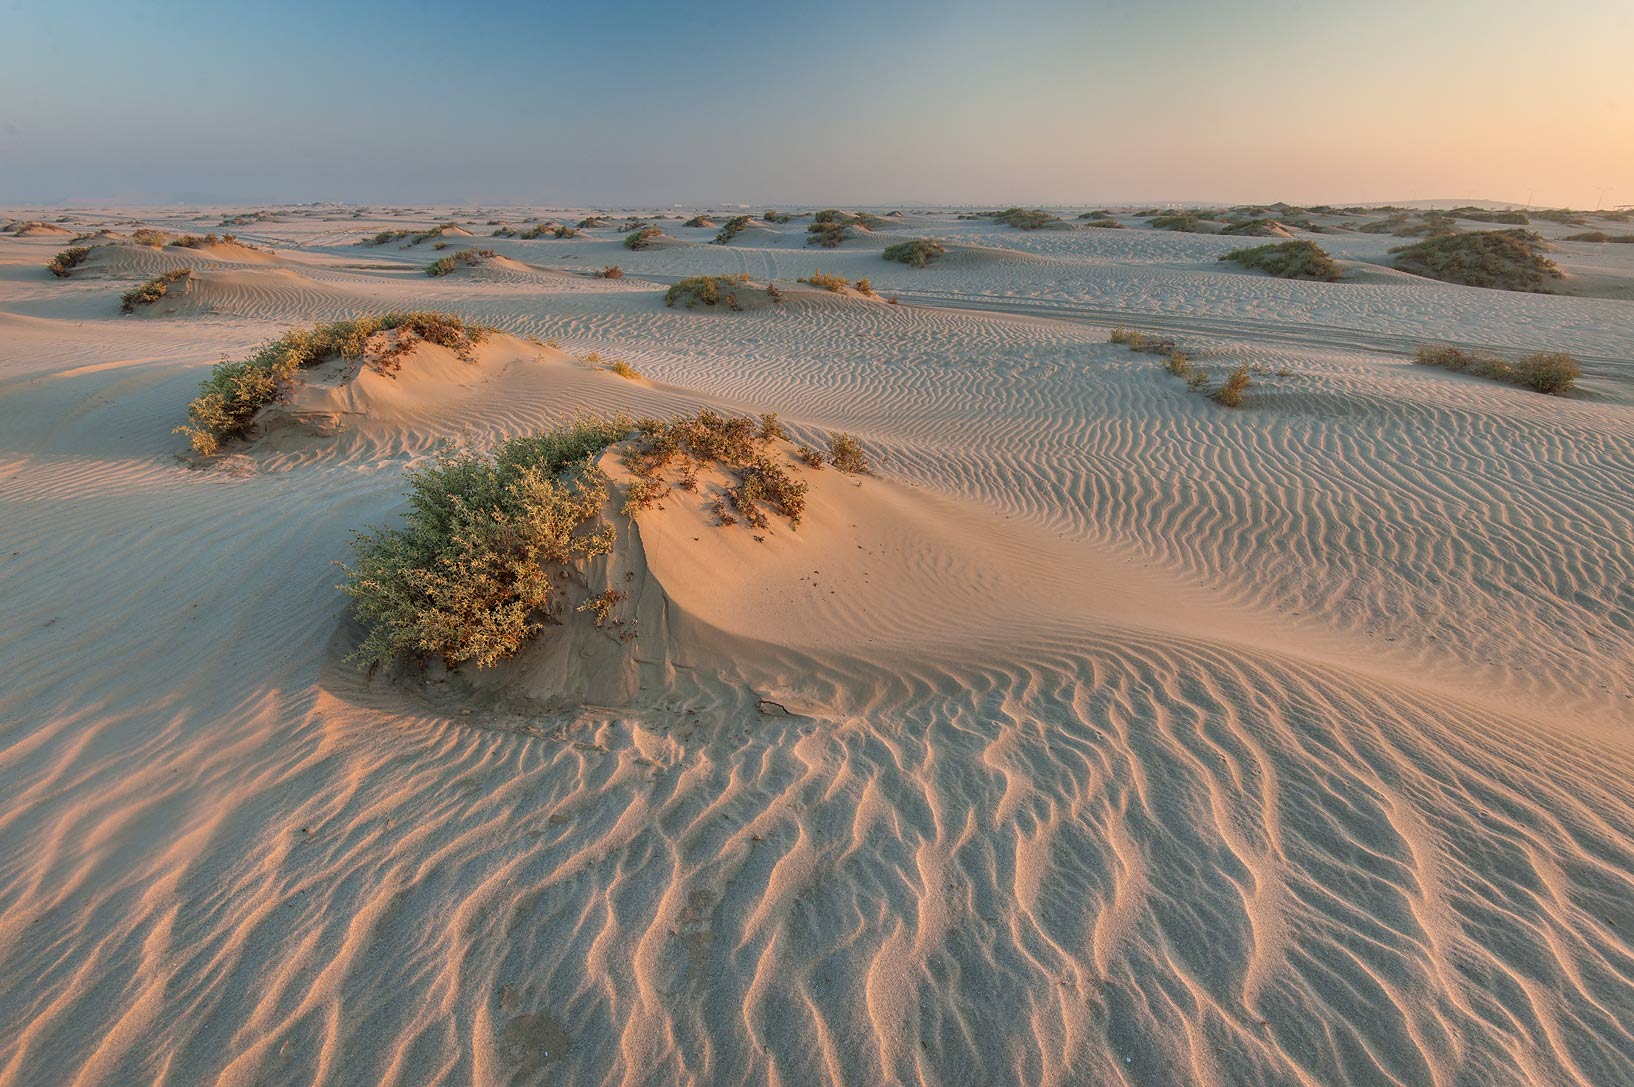 Qatar’s Deserts are Hot, Dry, and Full of Invasive Toads